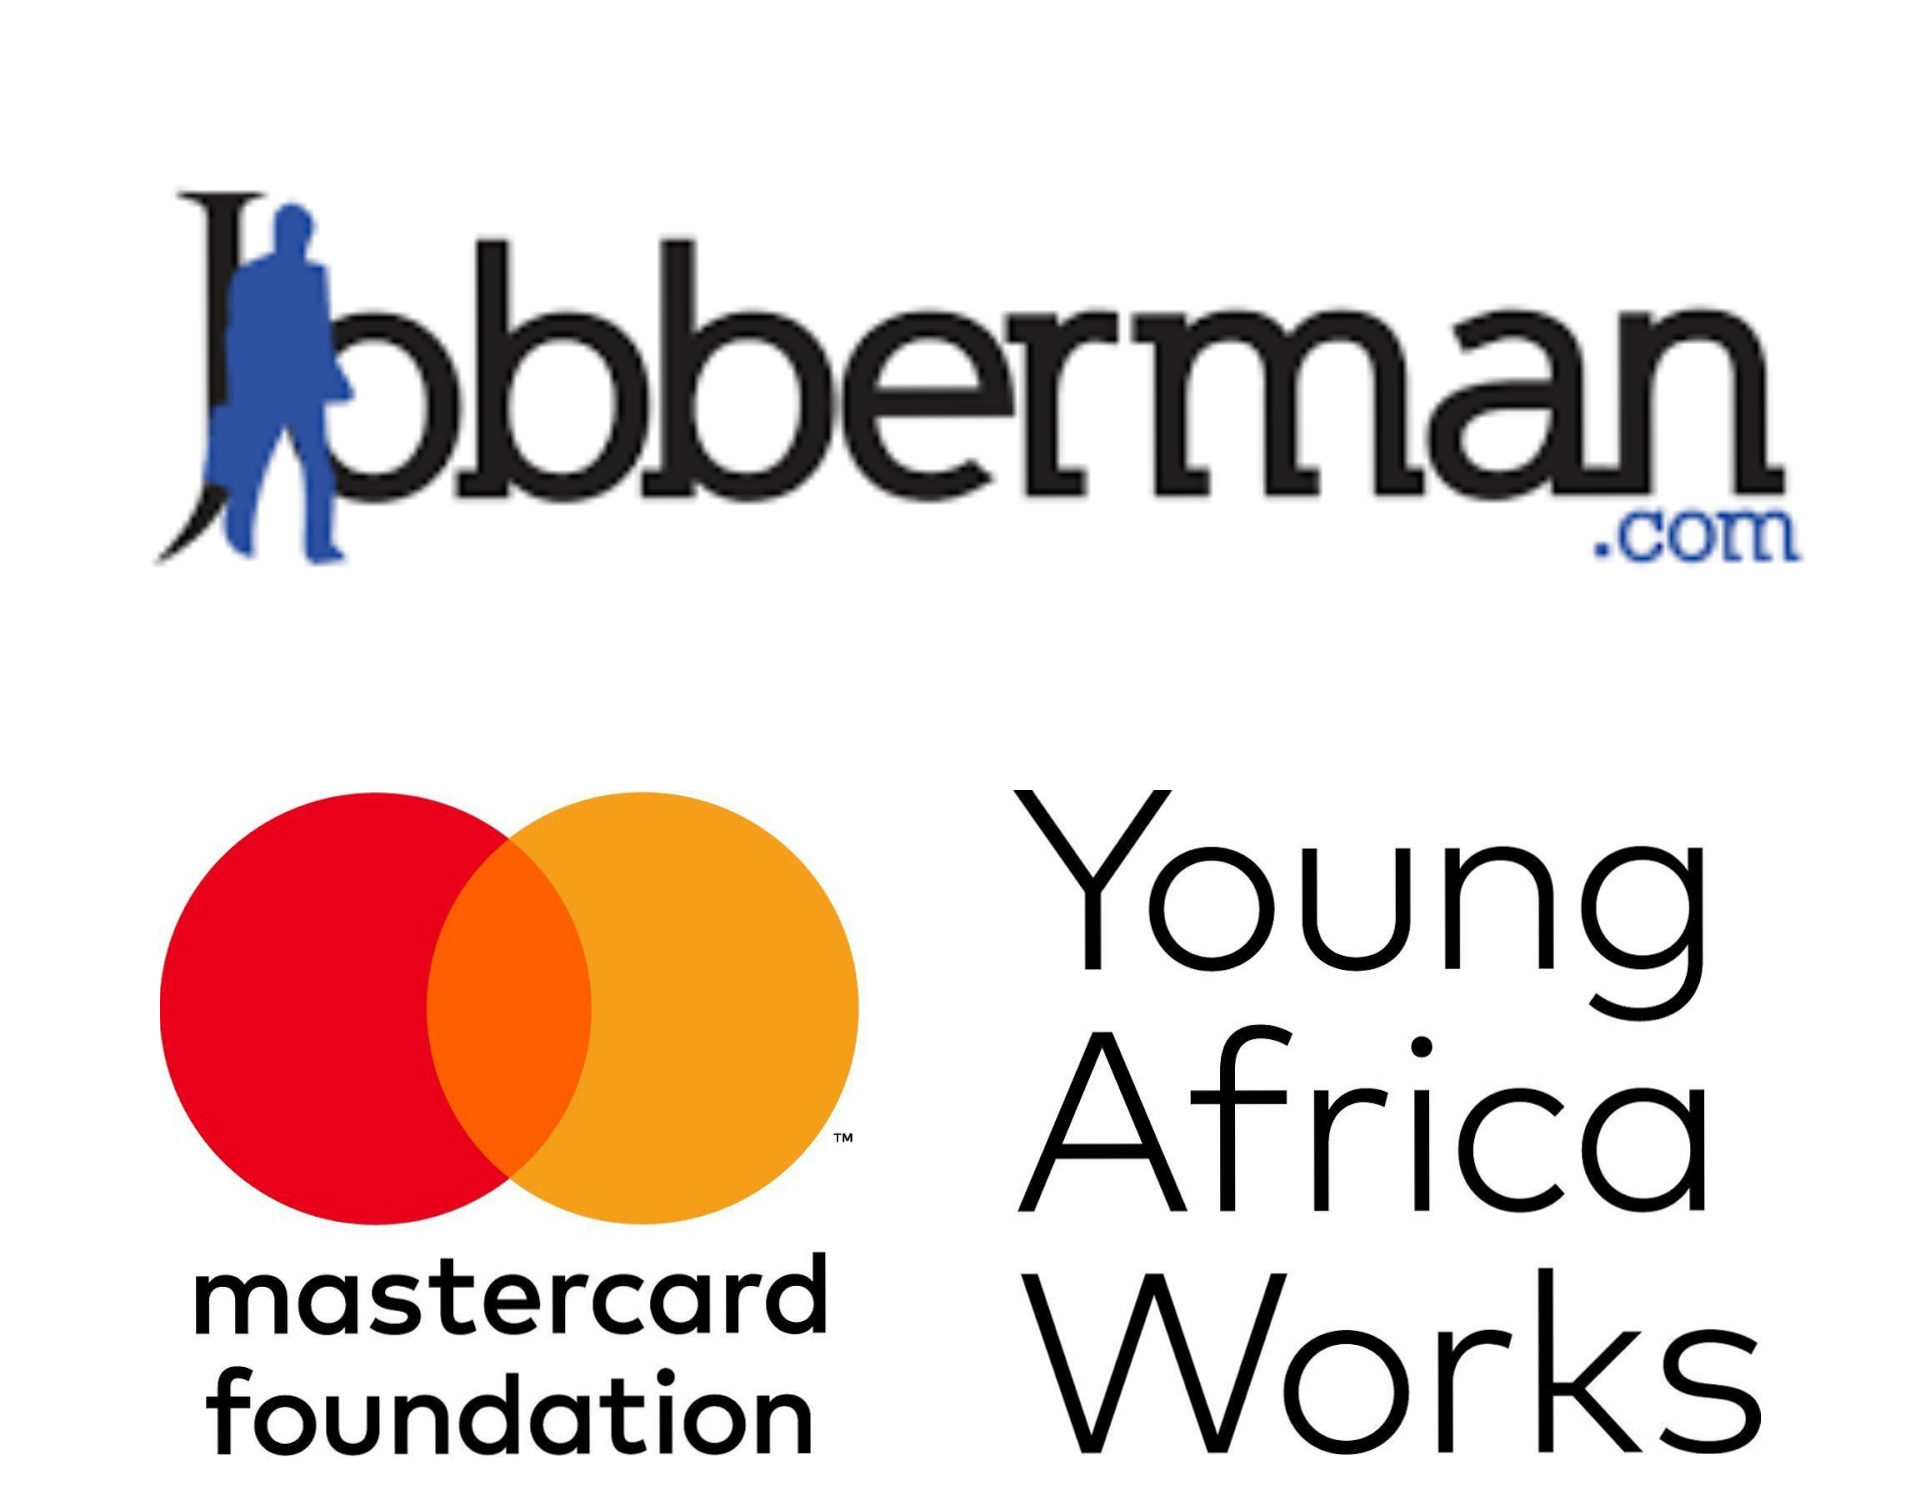 Jobberman partners with Mastercard Foundation to address the issue of unemployment in Nigeria.